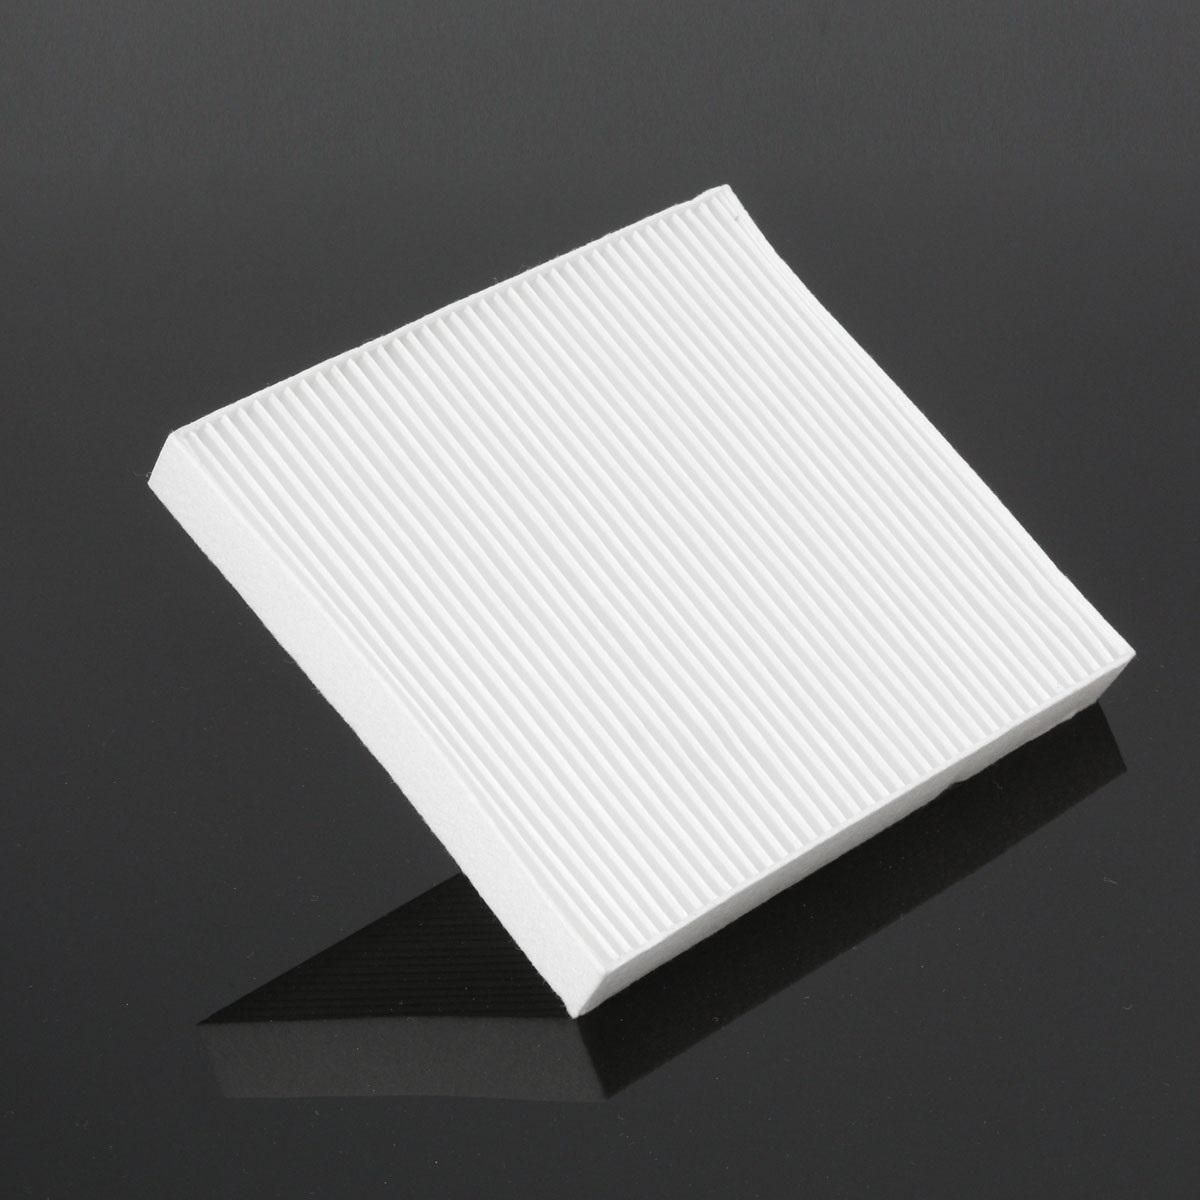 Yulicoauto AIR COND CABIN AIR FILTER for Nissan Teana J32 (2010)